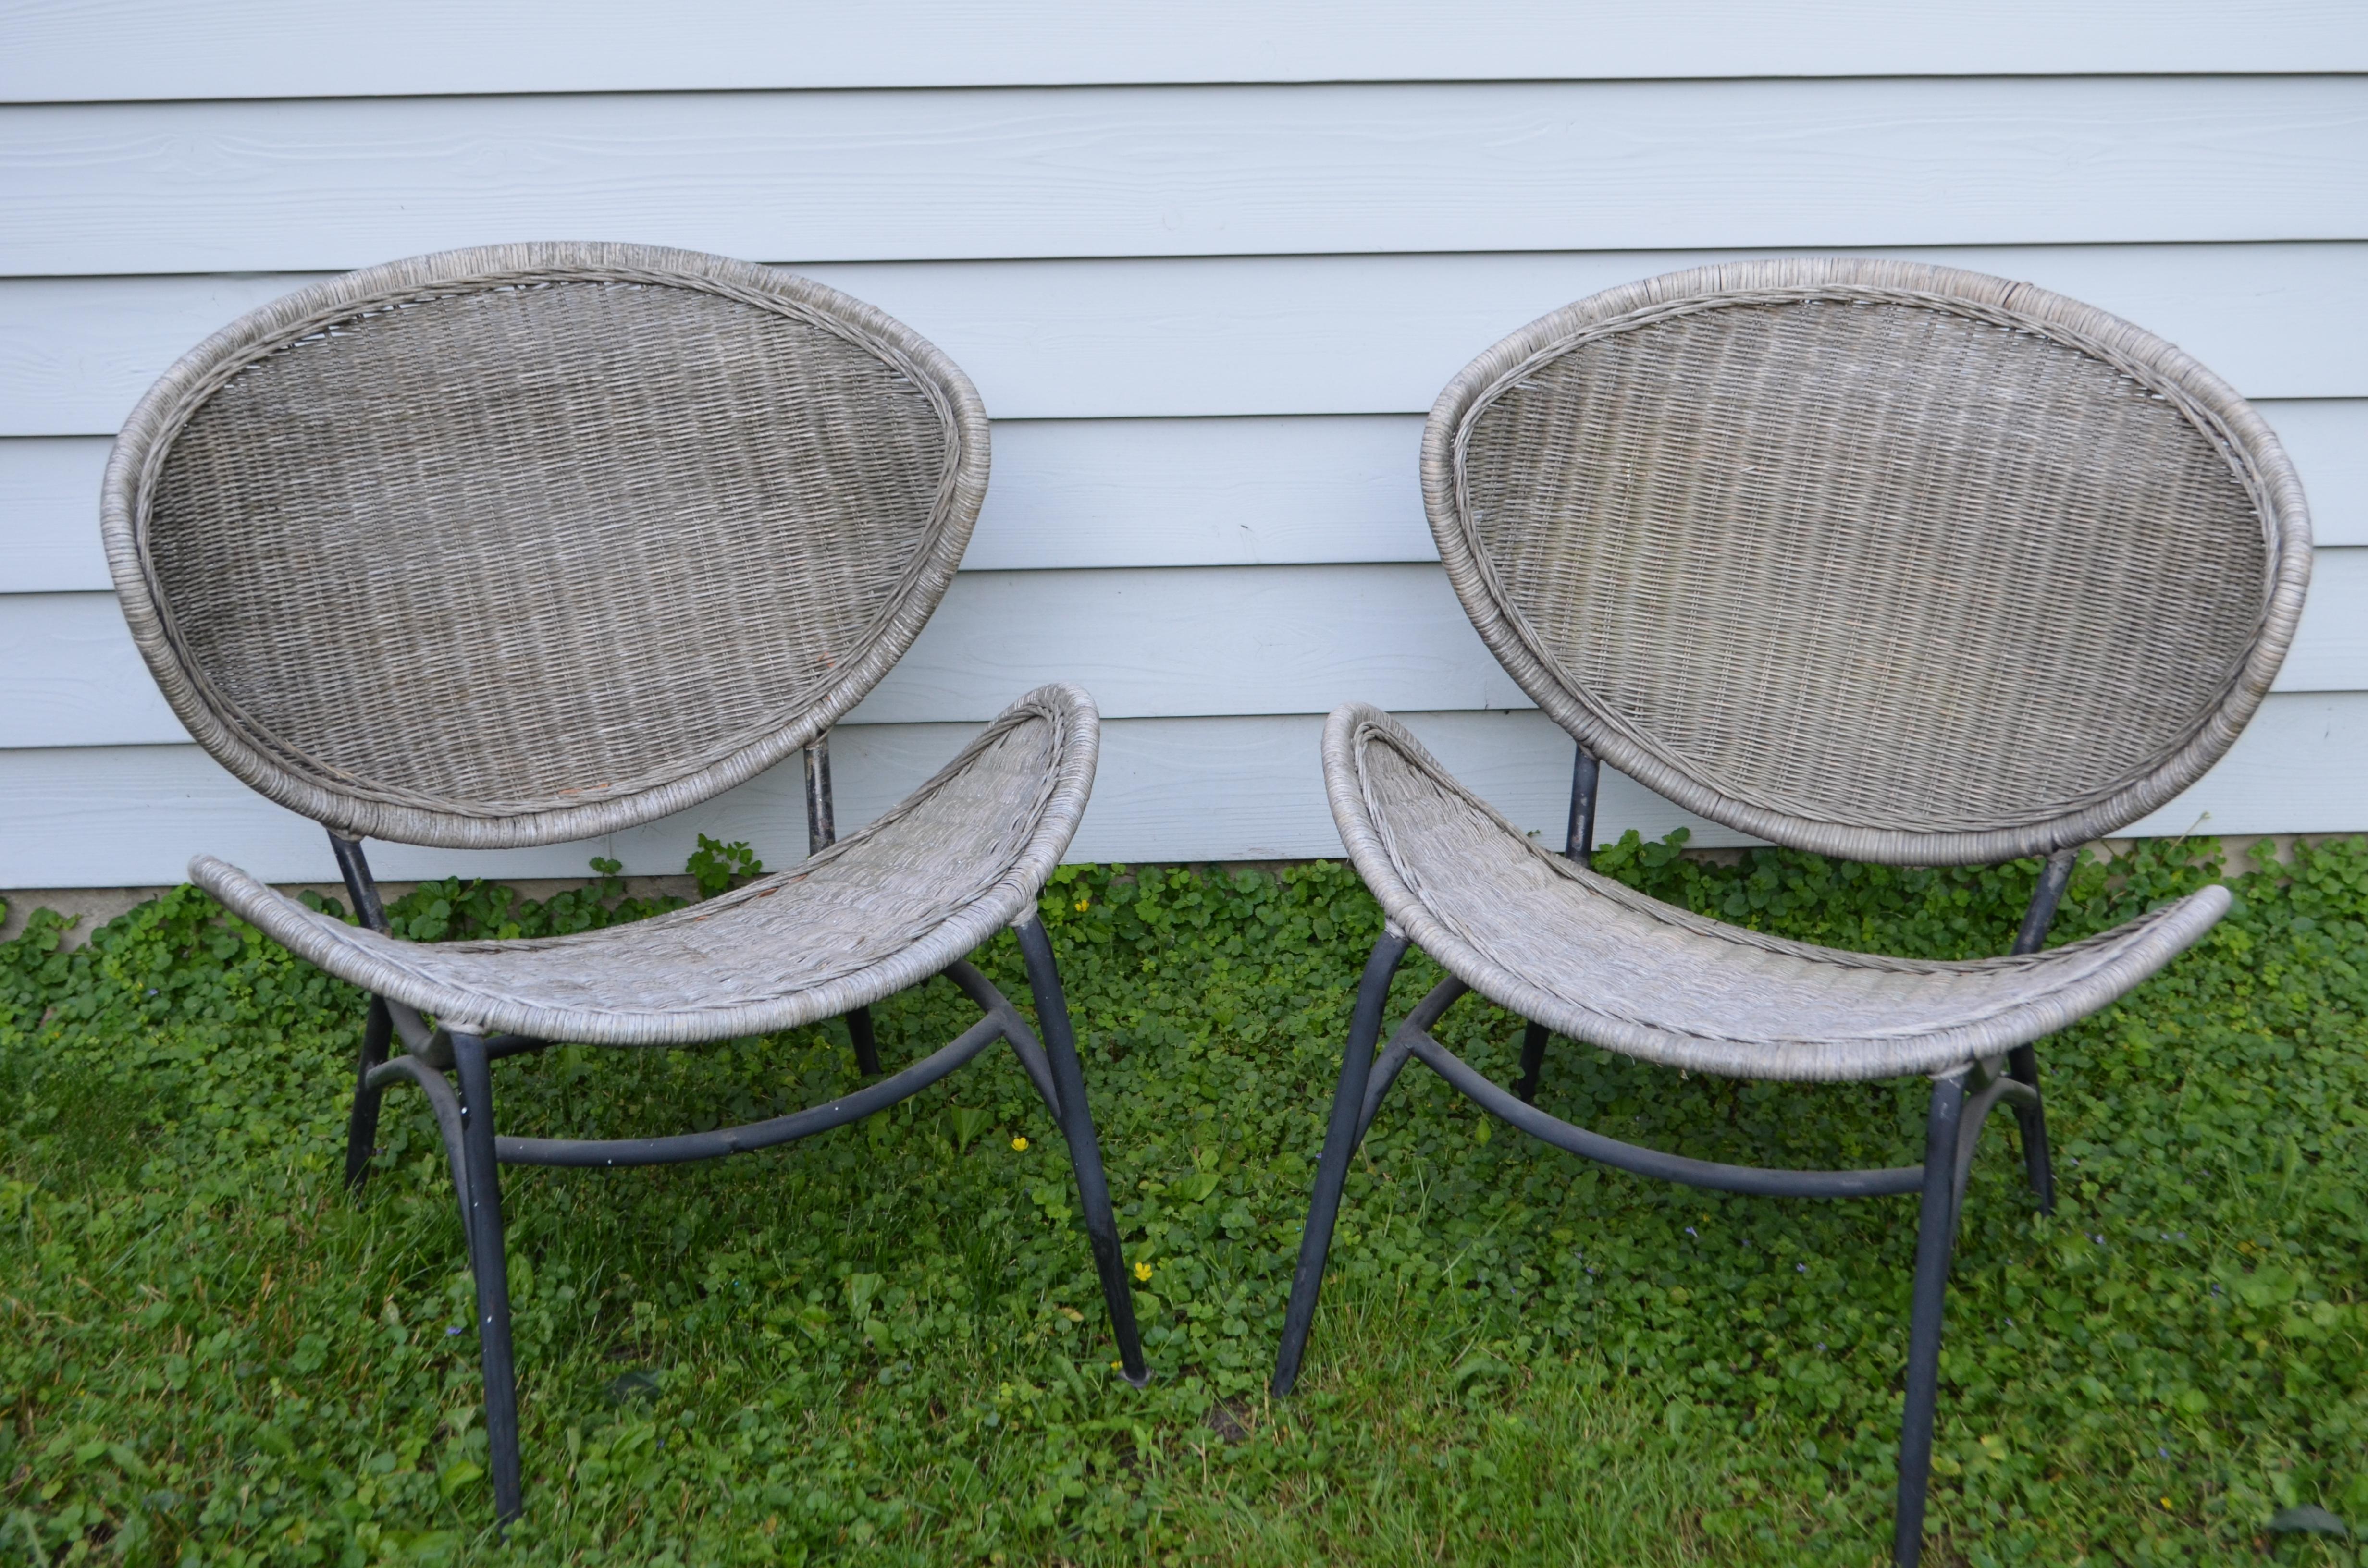 Mid-20th Century Salterini Wicker Clamshell Chairs, Pair, with Steel Frame for Home, Patio, Porch